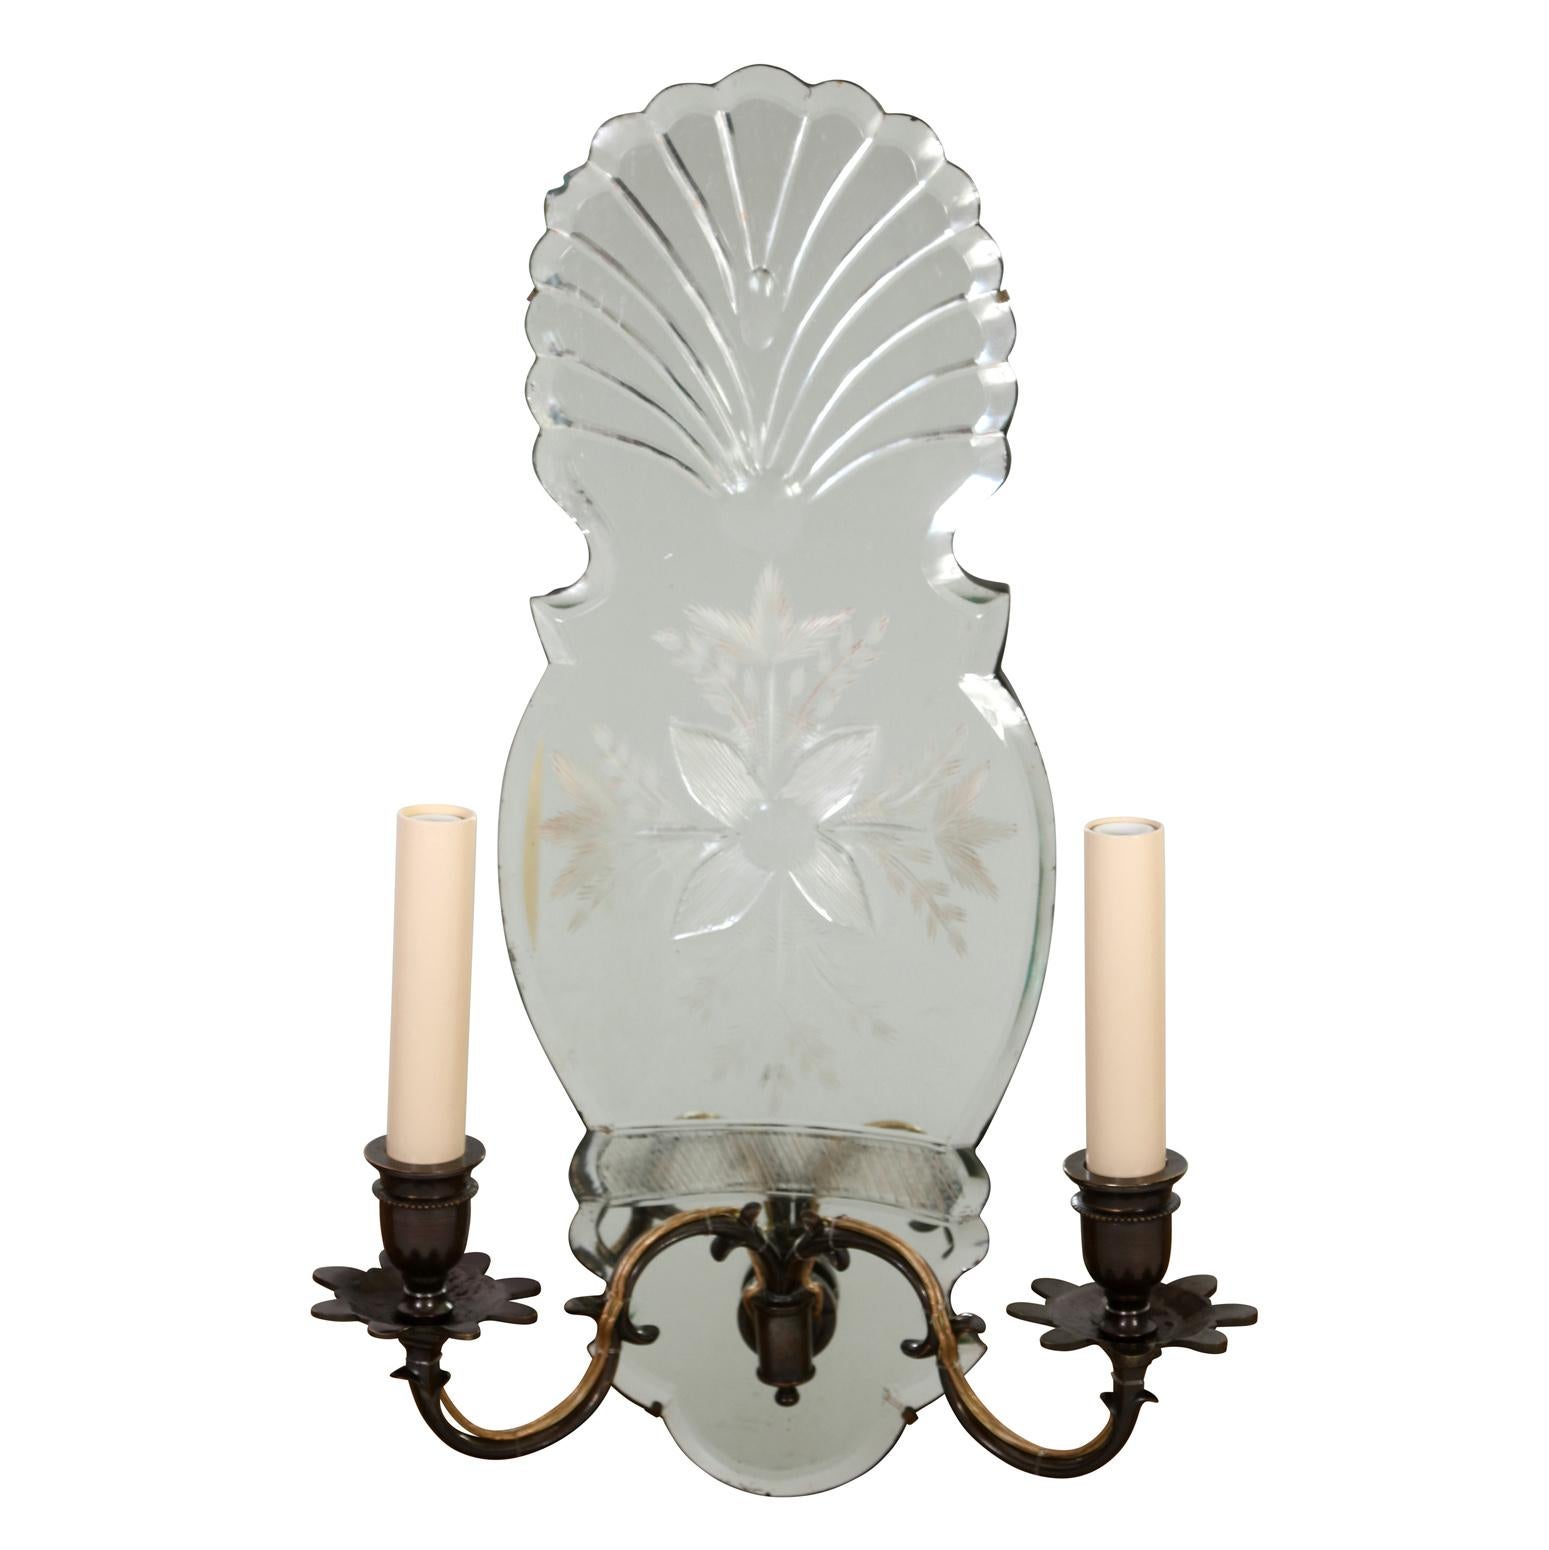 A pair of Venetian mirrored back, shell form, double arm sconces.  The shaped mirrored back vintage wall lights have a  cut glass design with a floral motif at the center, shell design at the top and two brass curved arms at the base.  A lovely